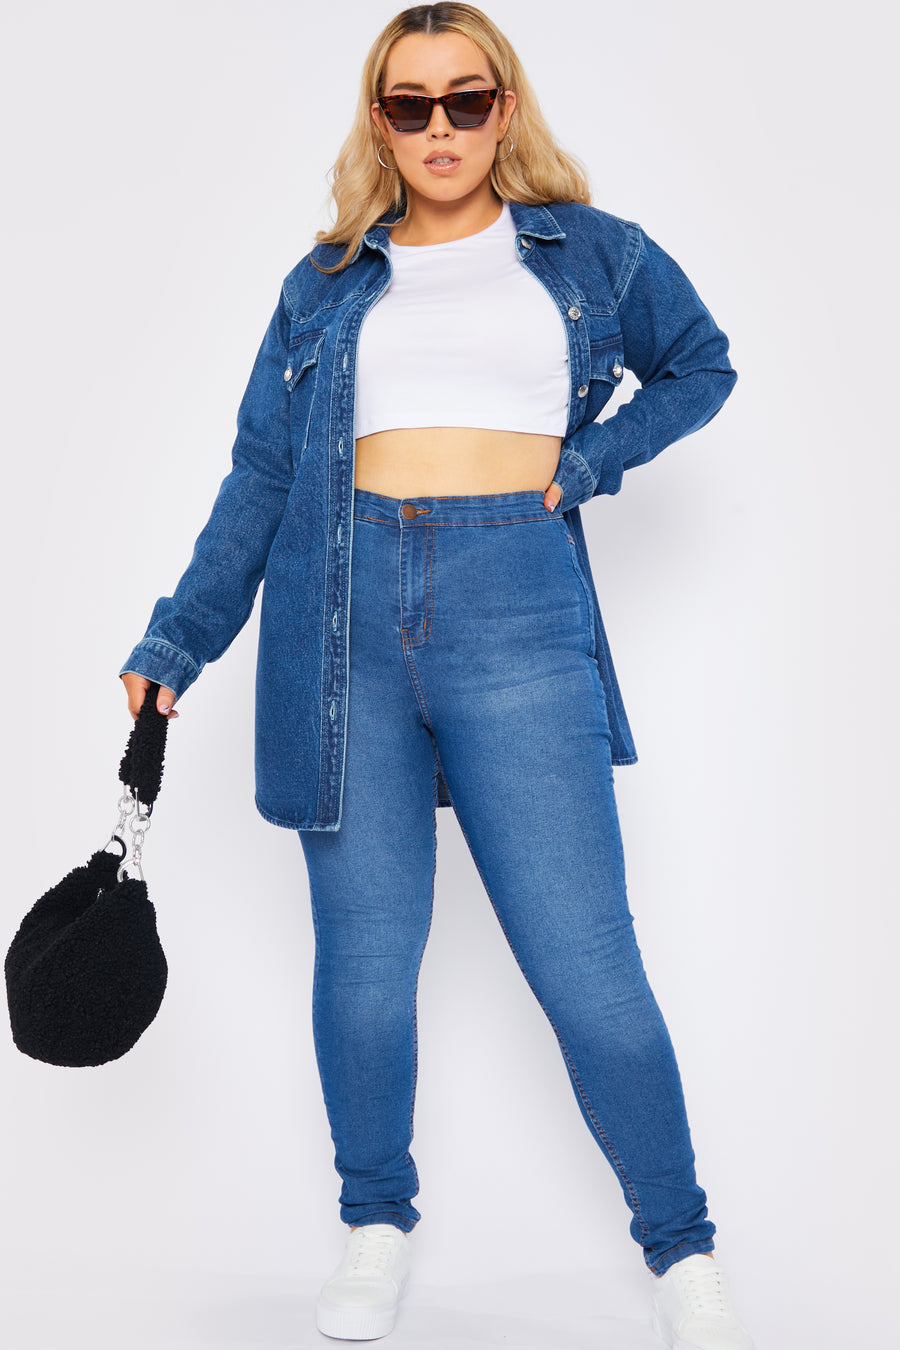 Full body styled shot of a standing plus size female model wearing JMOJO Mid Blue High Waisted Skinny Jeans holding a handbag and wearing sunglasses